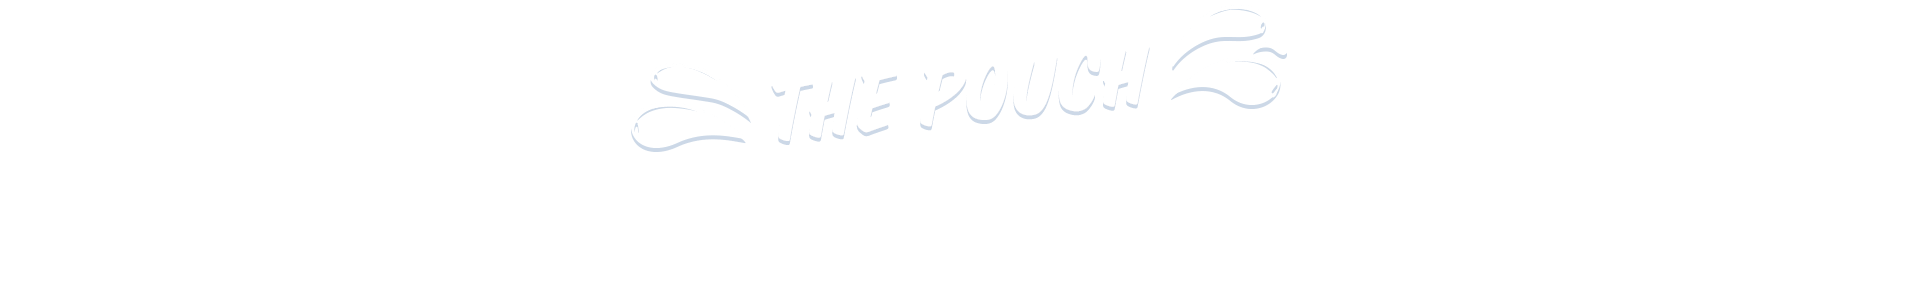 the pouch